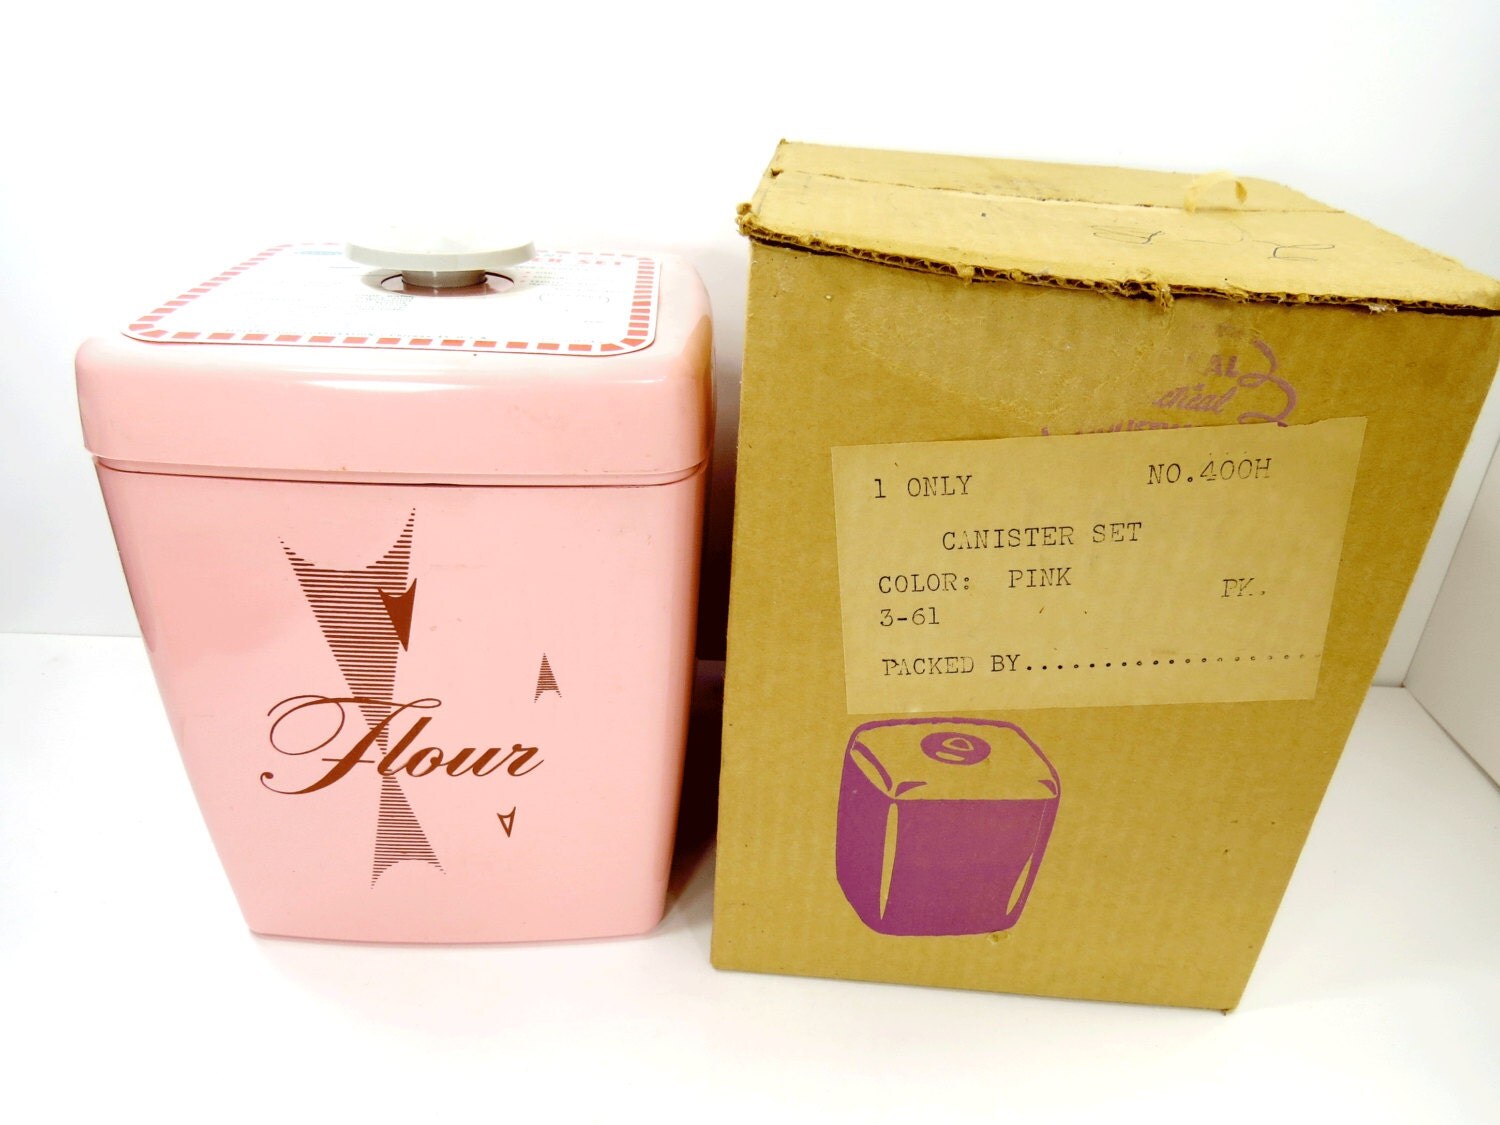 4 Piece Pink Retro Plastic Canister Set by Federal Never